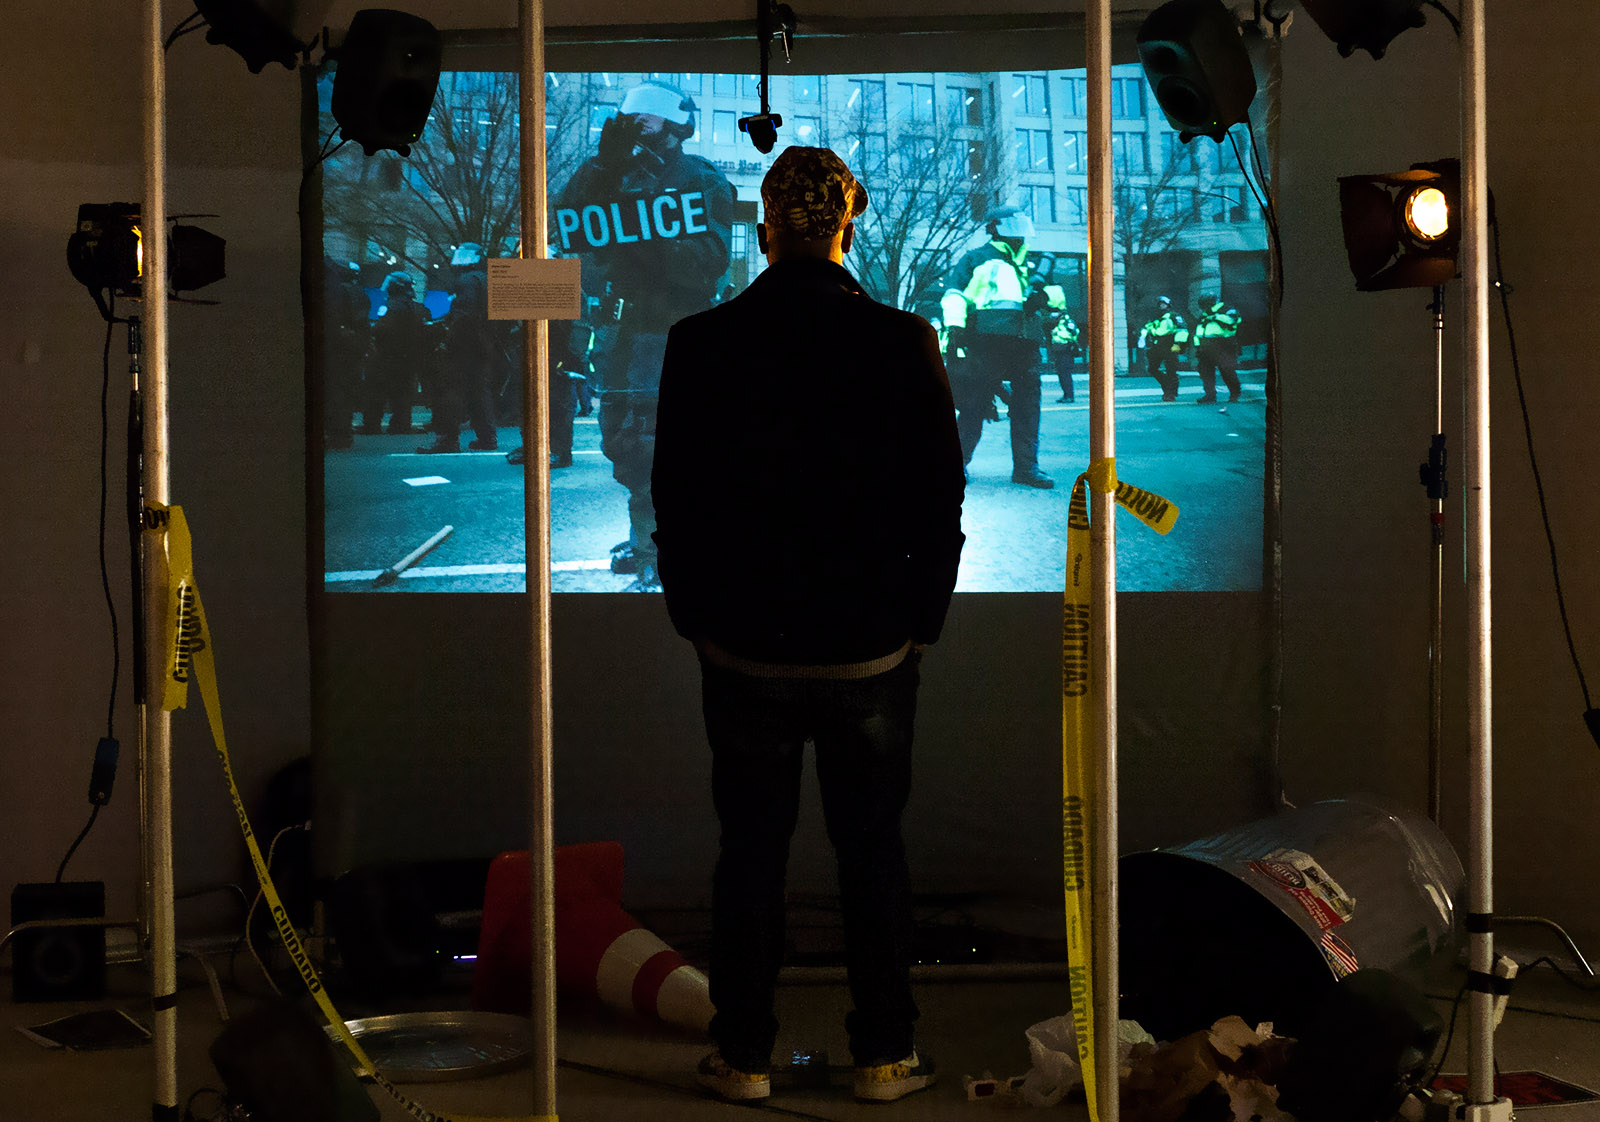 An audience member standing in front of the installation in a dark room